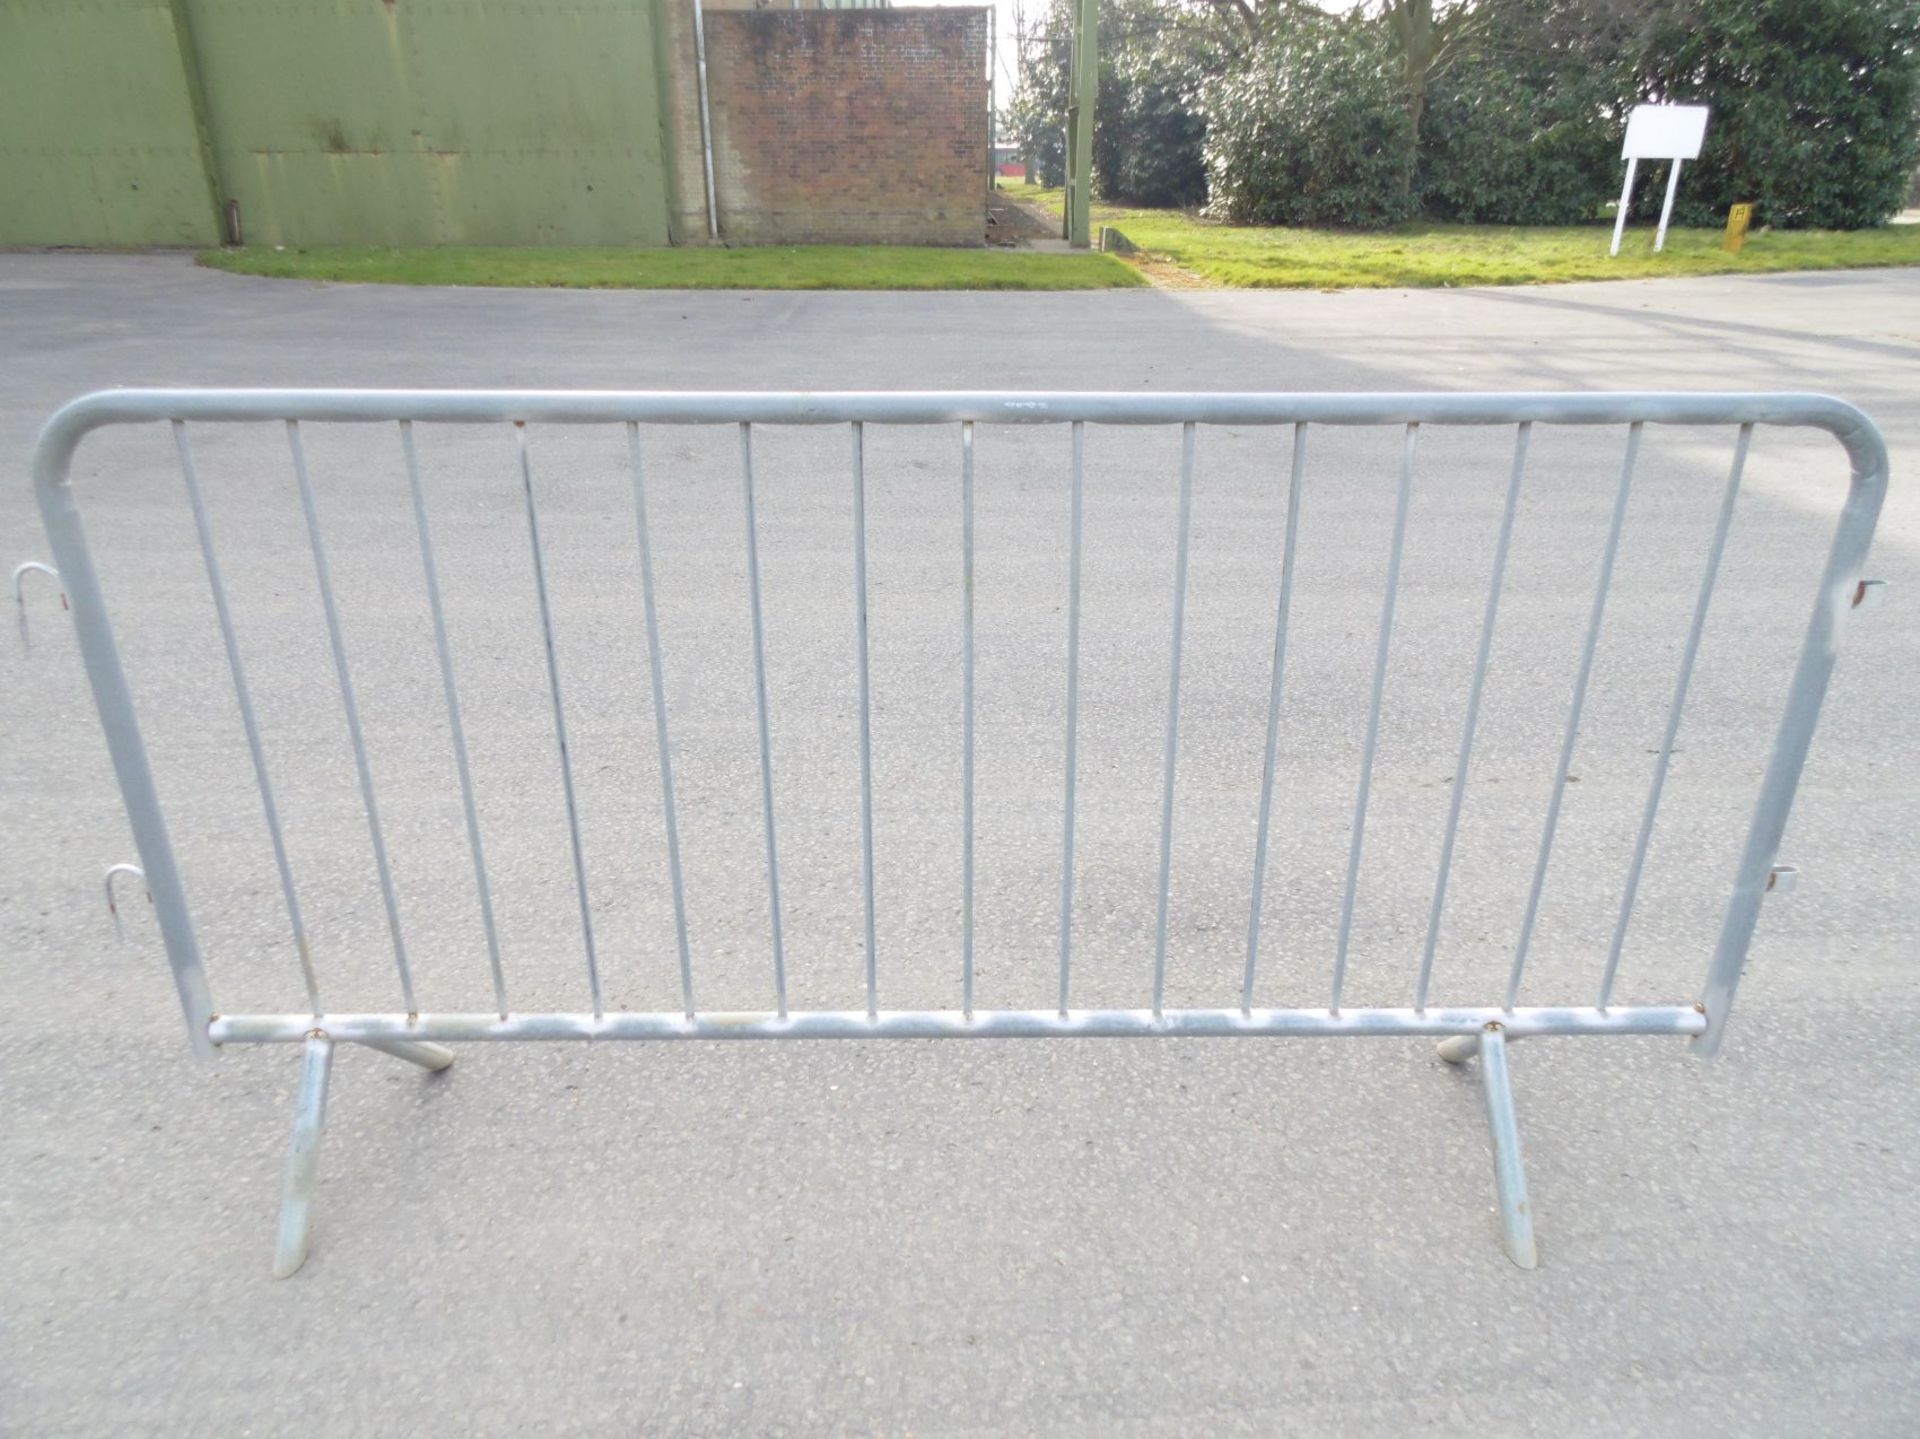 * qty 10 Crowd barriers 7ft1 long x 3ft8 height